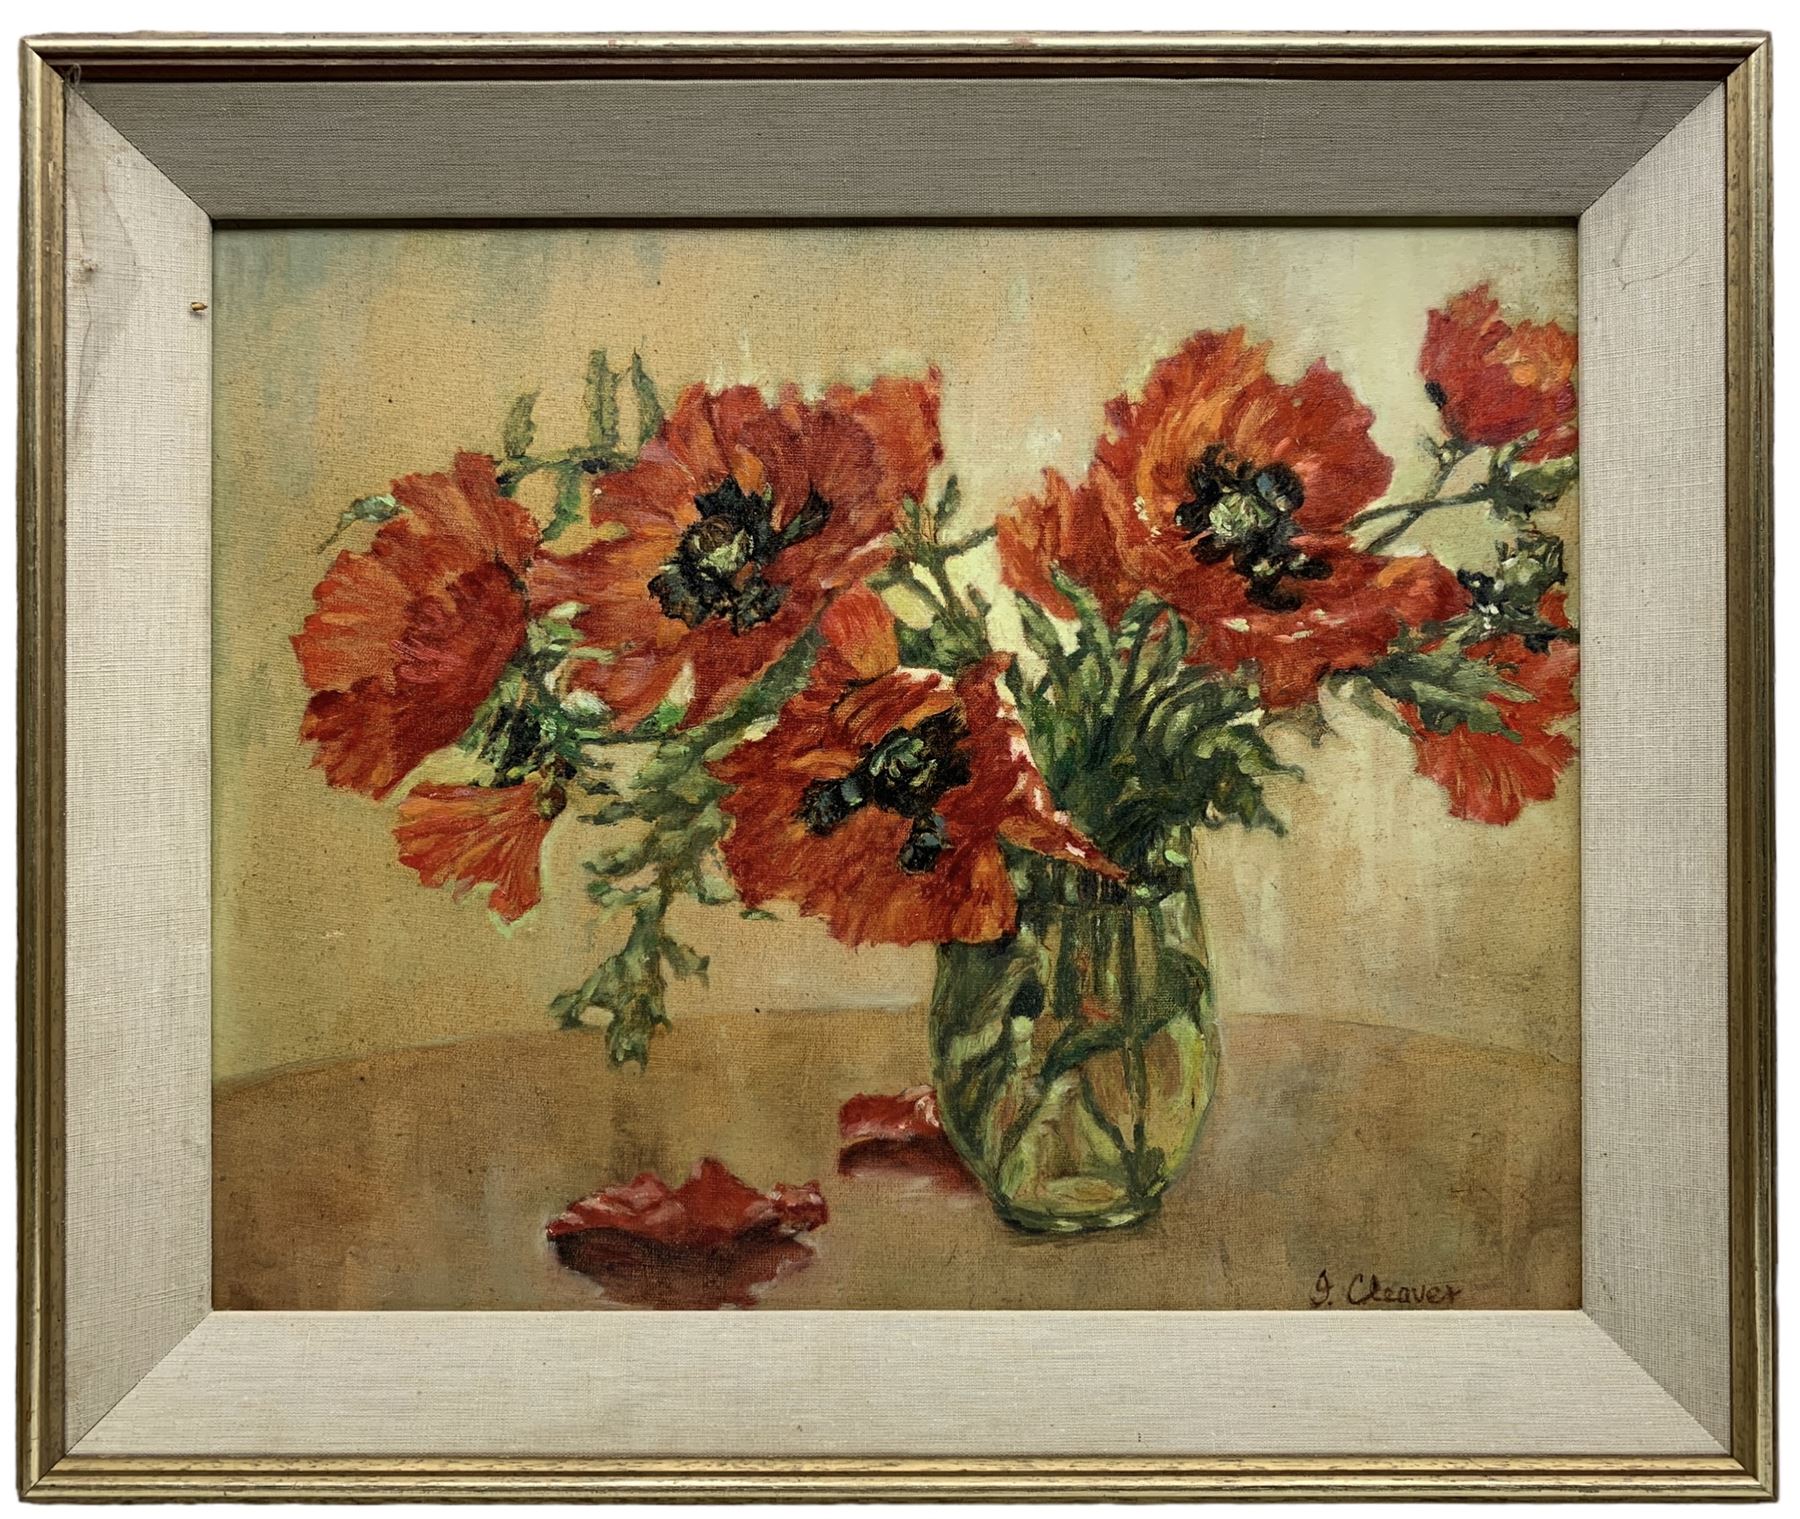 Cleaver (British Mid-20th century): Still Life of Poppies in a Vase - Image 2 of 4